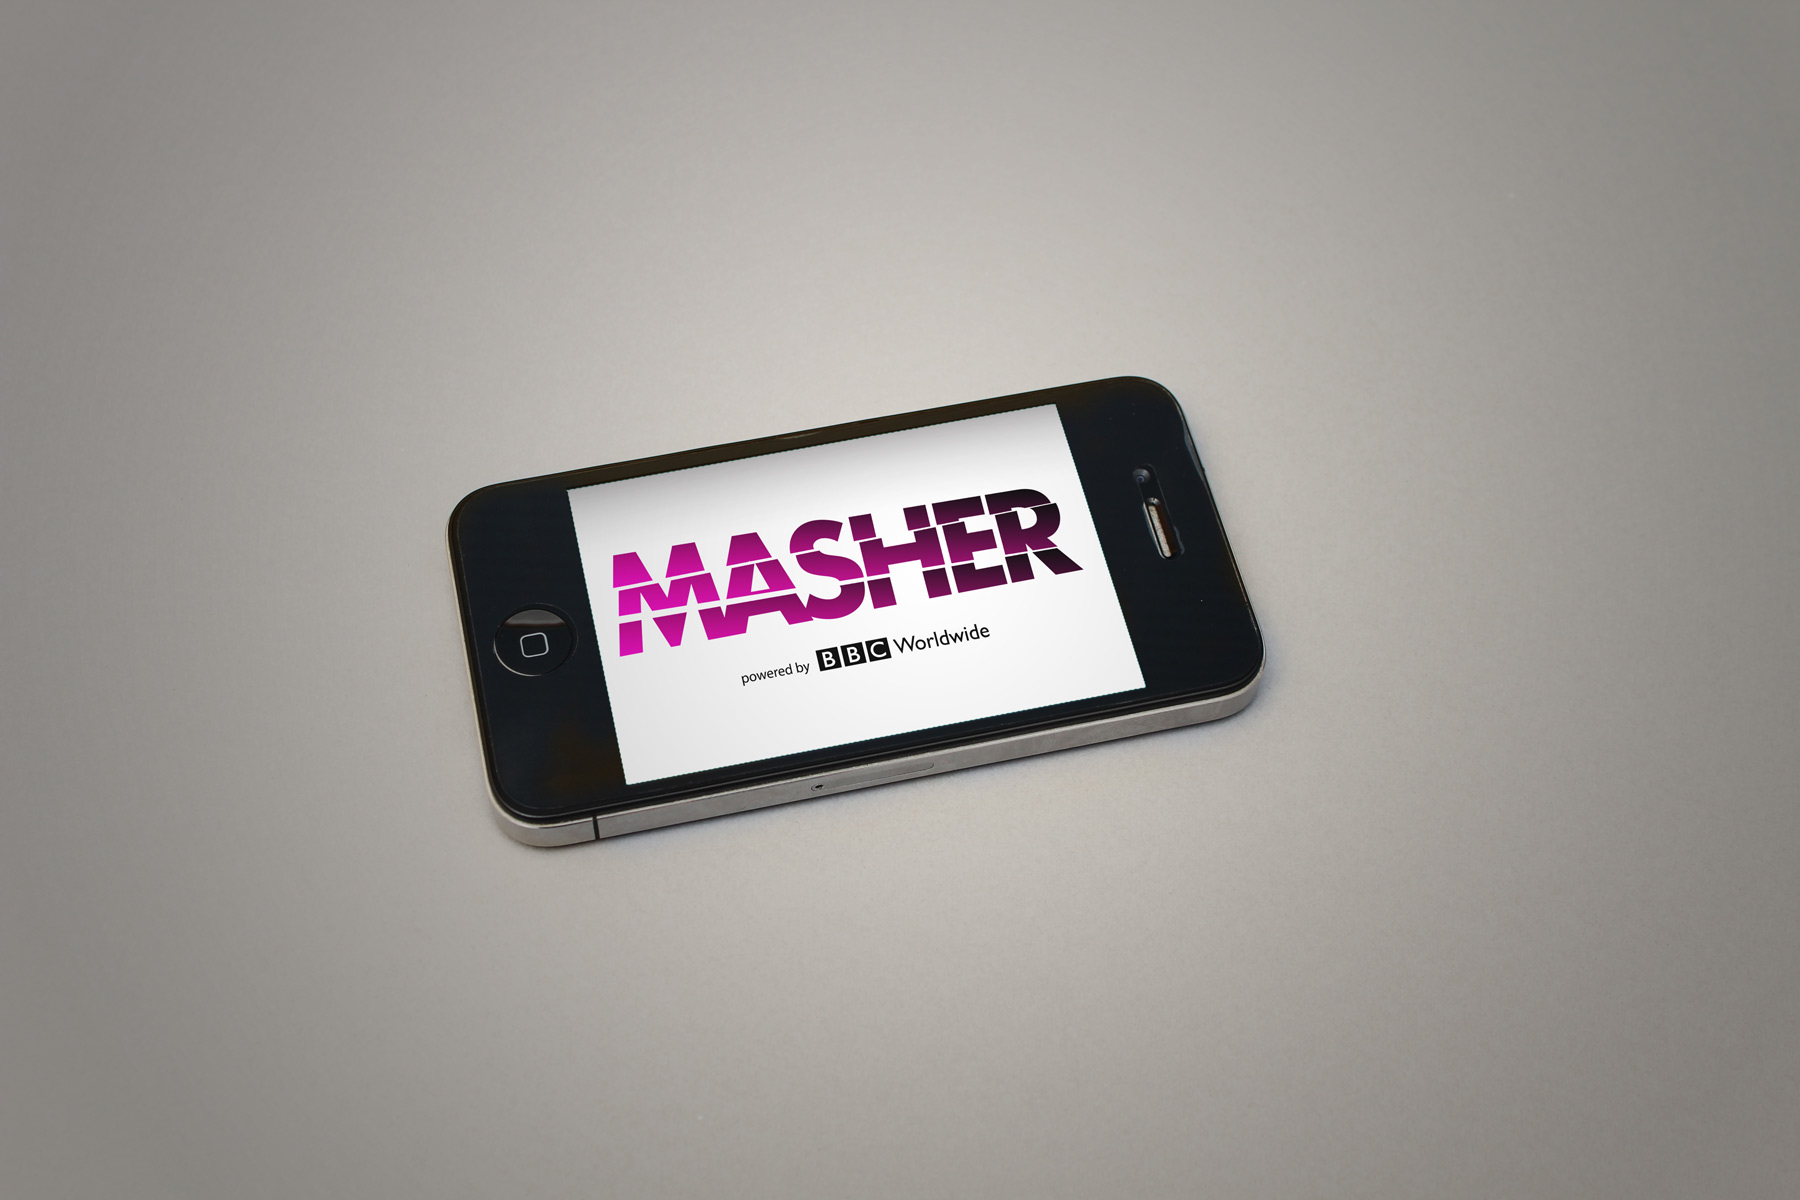 The Masher identity is inspired by the notion of dicing and slicing content - Hence the wordmark has been cut into numerous parts, a graphic representation of this idea.